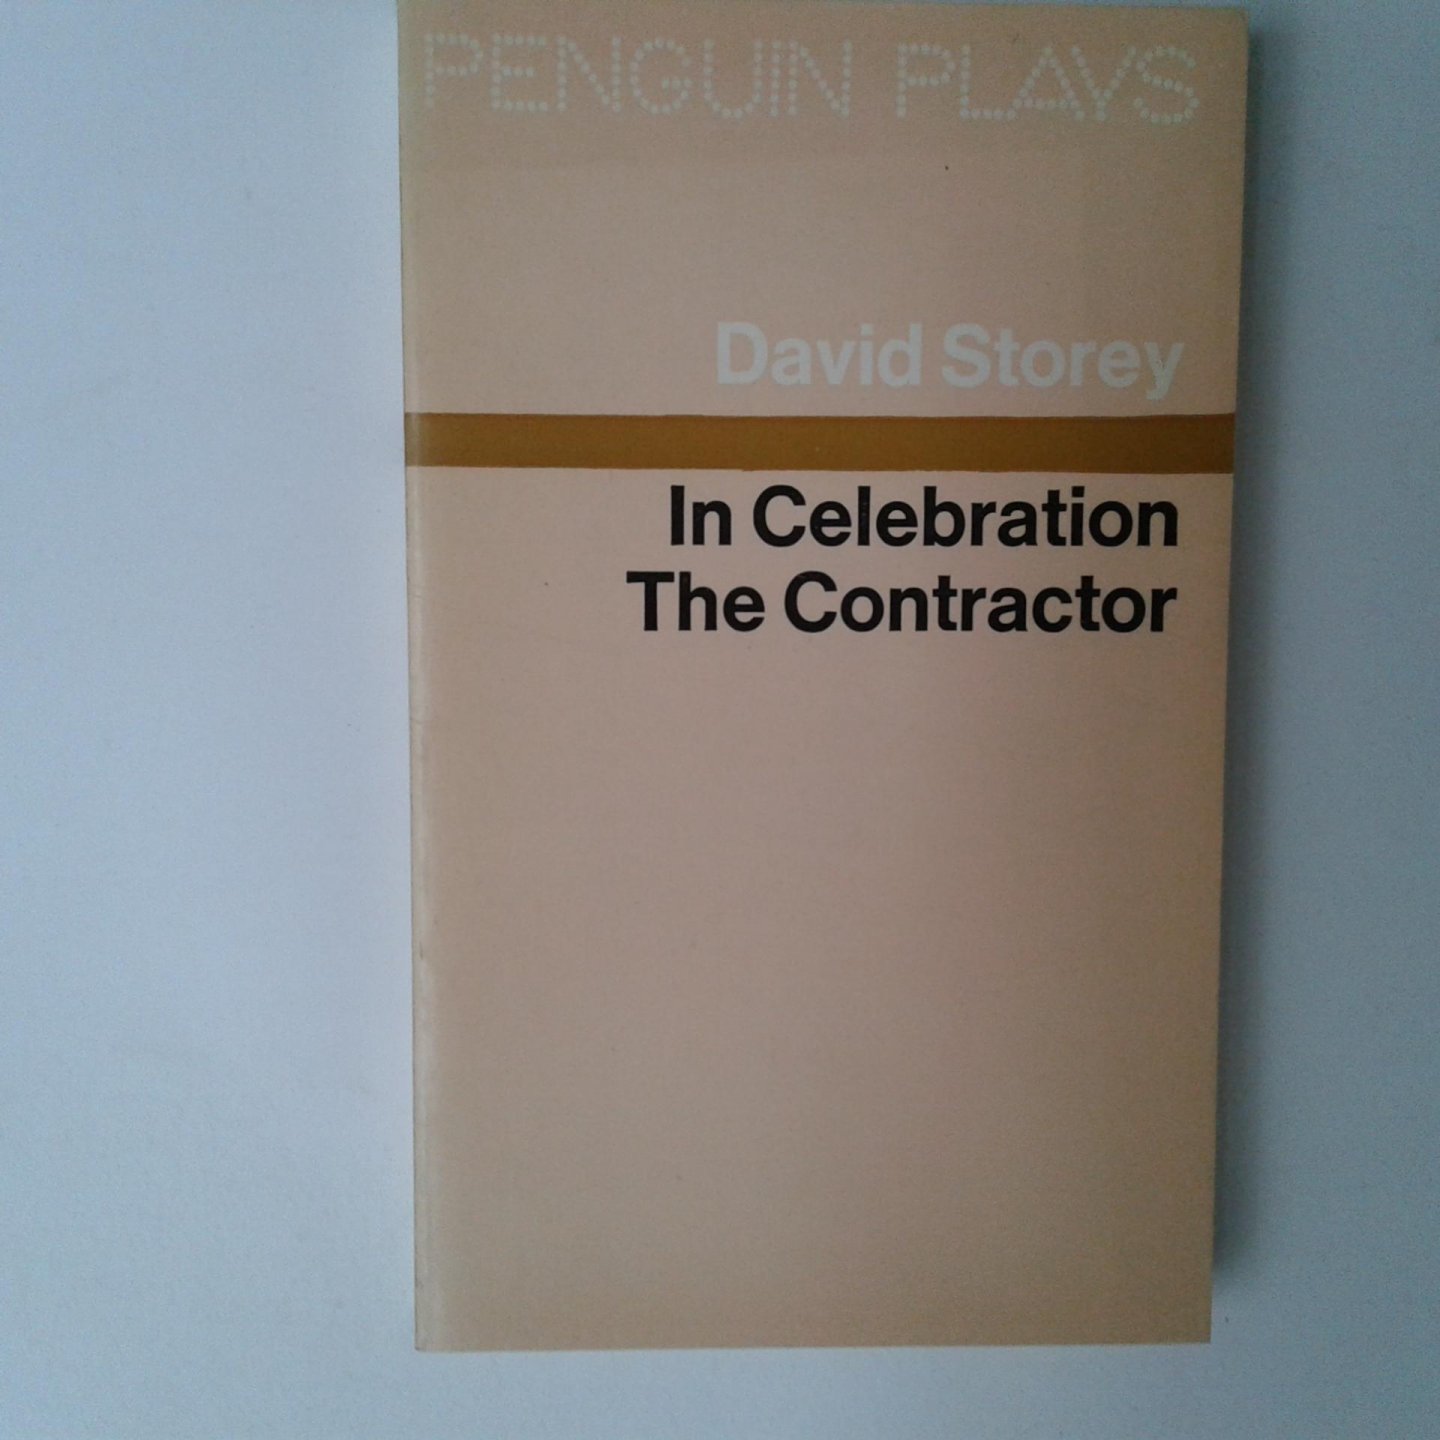 Storey, David - In Celebration ; The Contractor